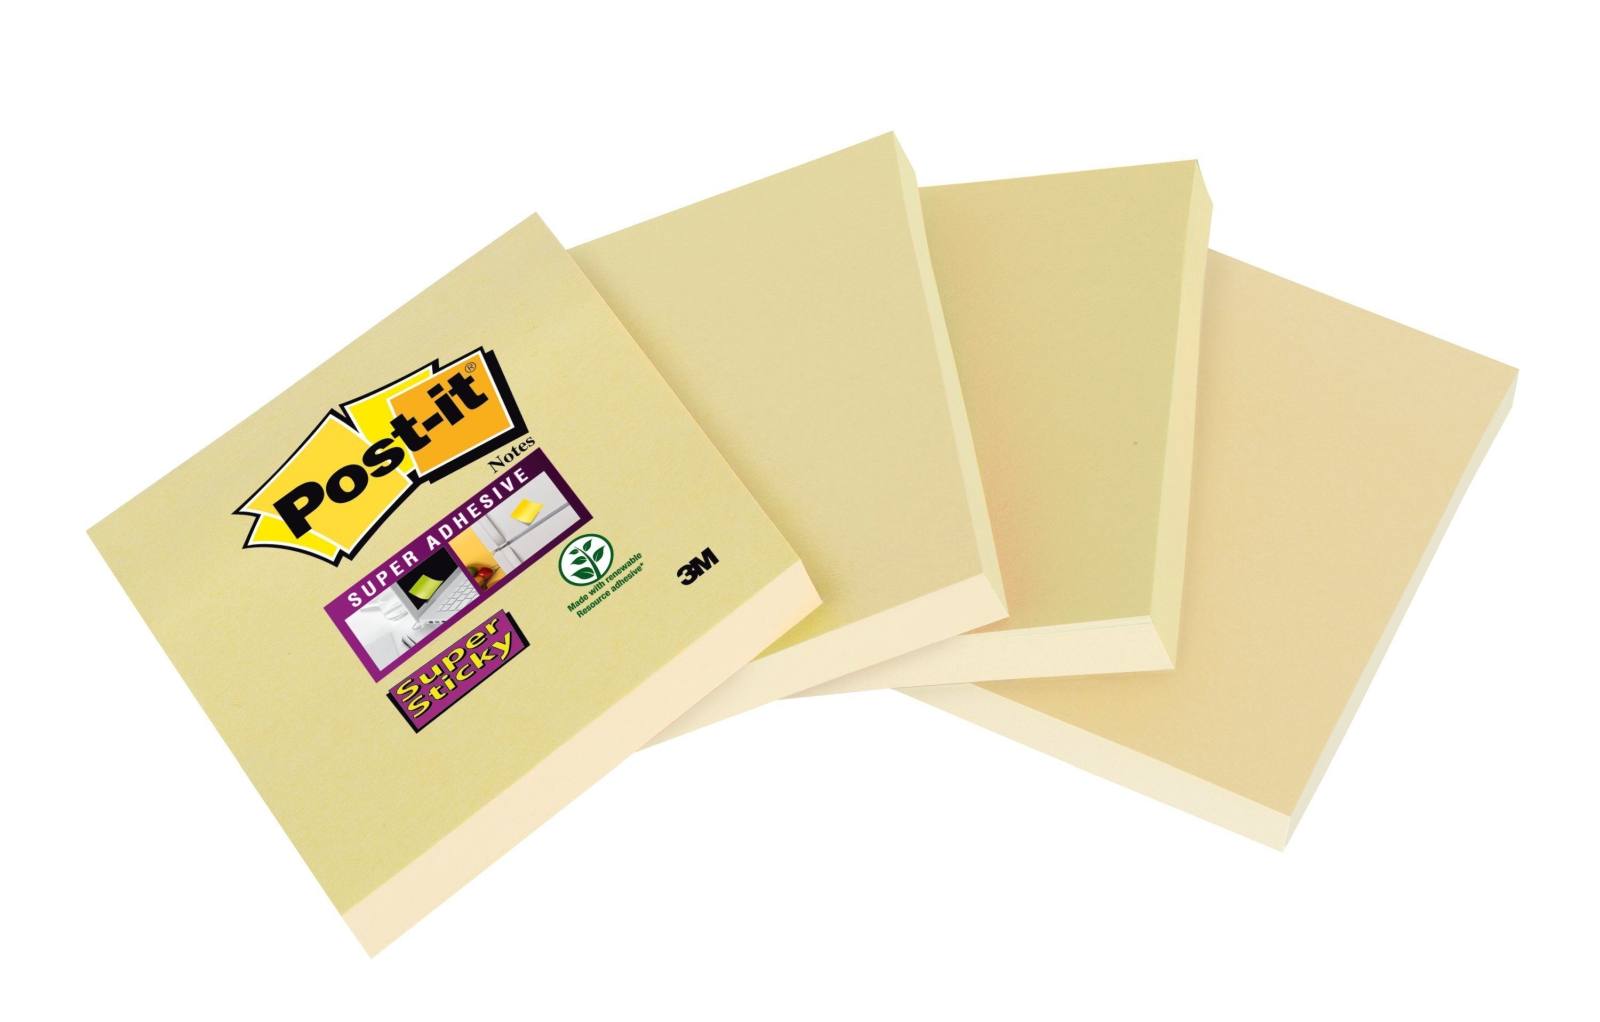 3M Post-it Super Sticky Notes 6910CY, 48 x 48 mm, yellow, 4 pads of 45 sheets each